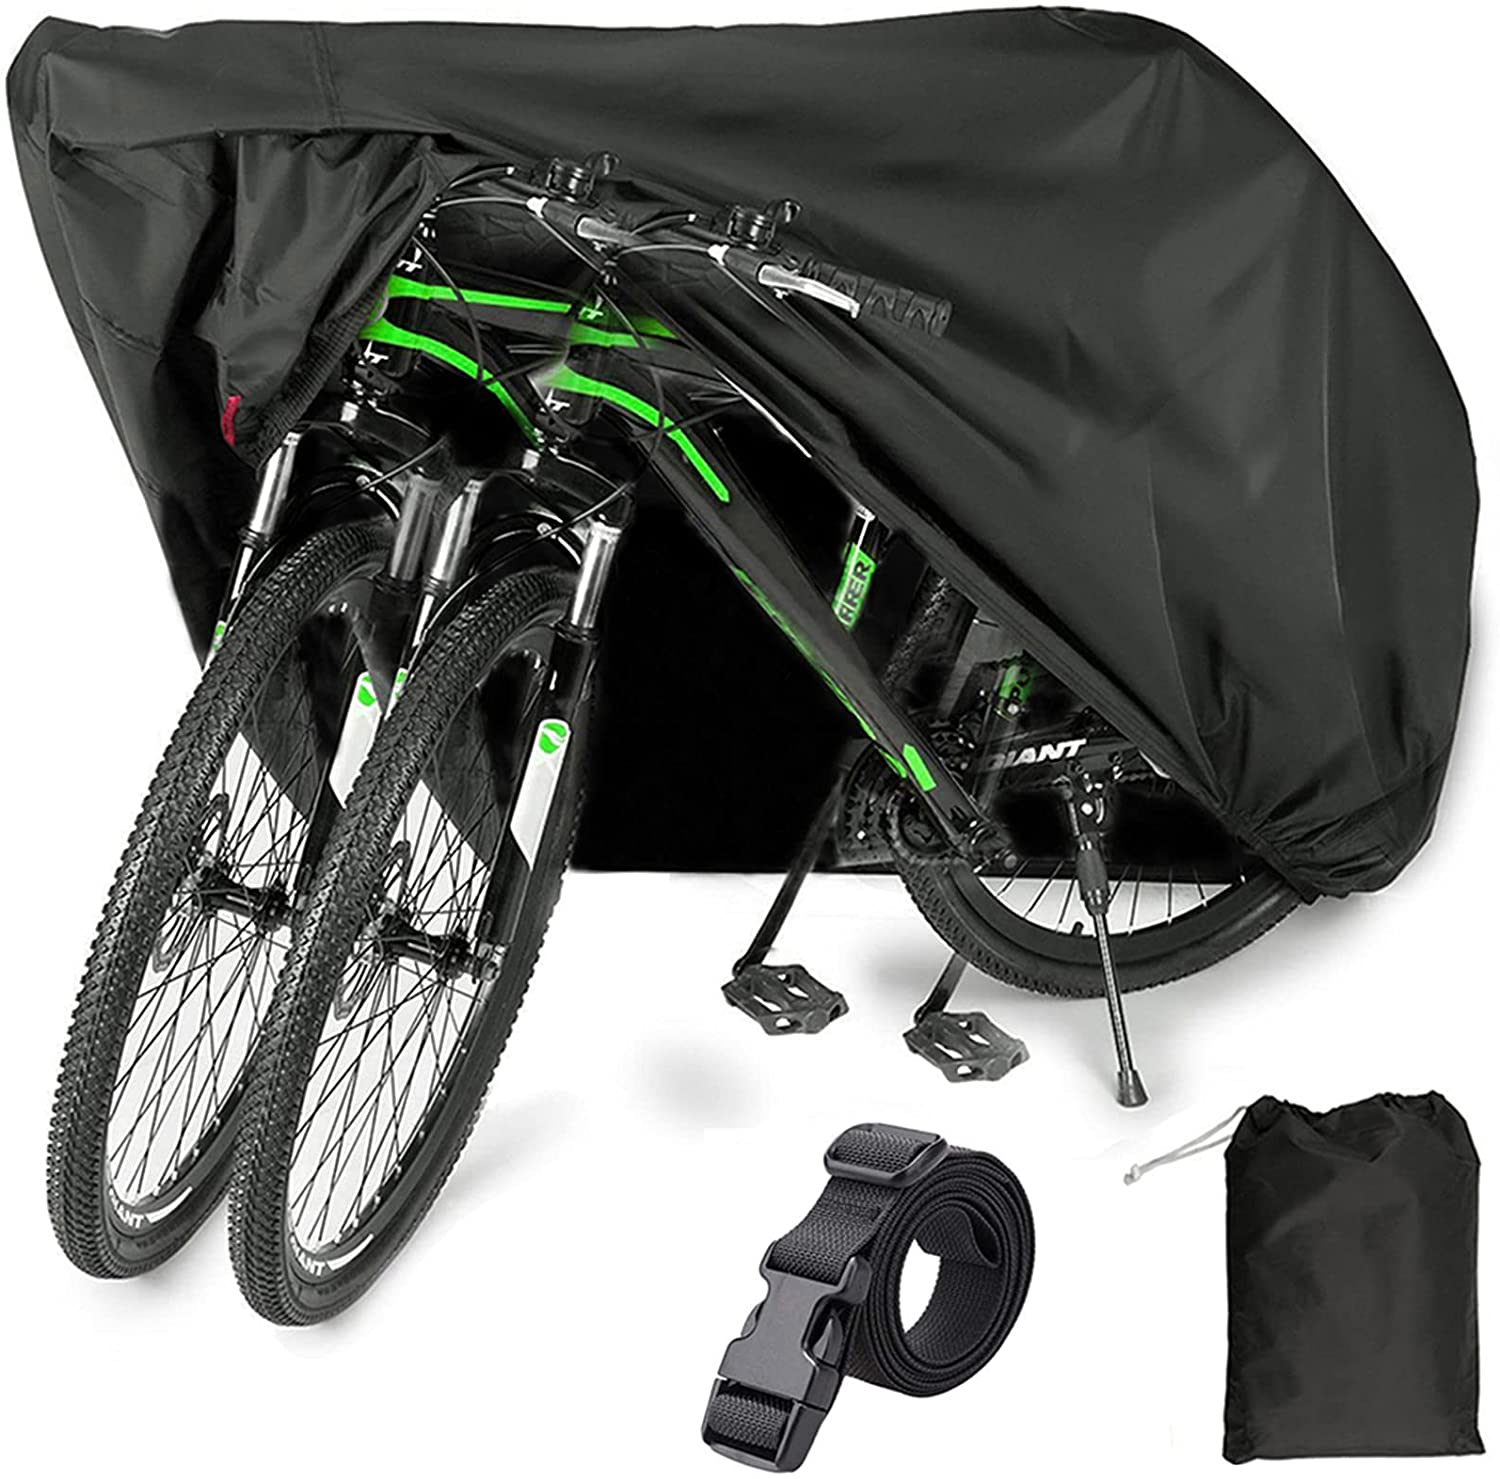 Ripstop Material Heavy Duty Bicycle Cover Firsttour 210D Oxford Fabric Bike Cover Waterproof for 1 or 2 Bikes Anti-UV Bike Covers Outdoor Storage Waterproof Dust-Proof Silver 